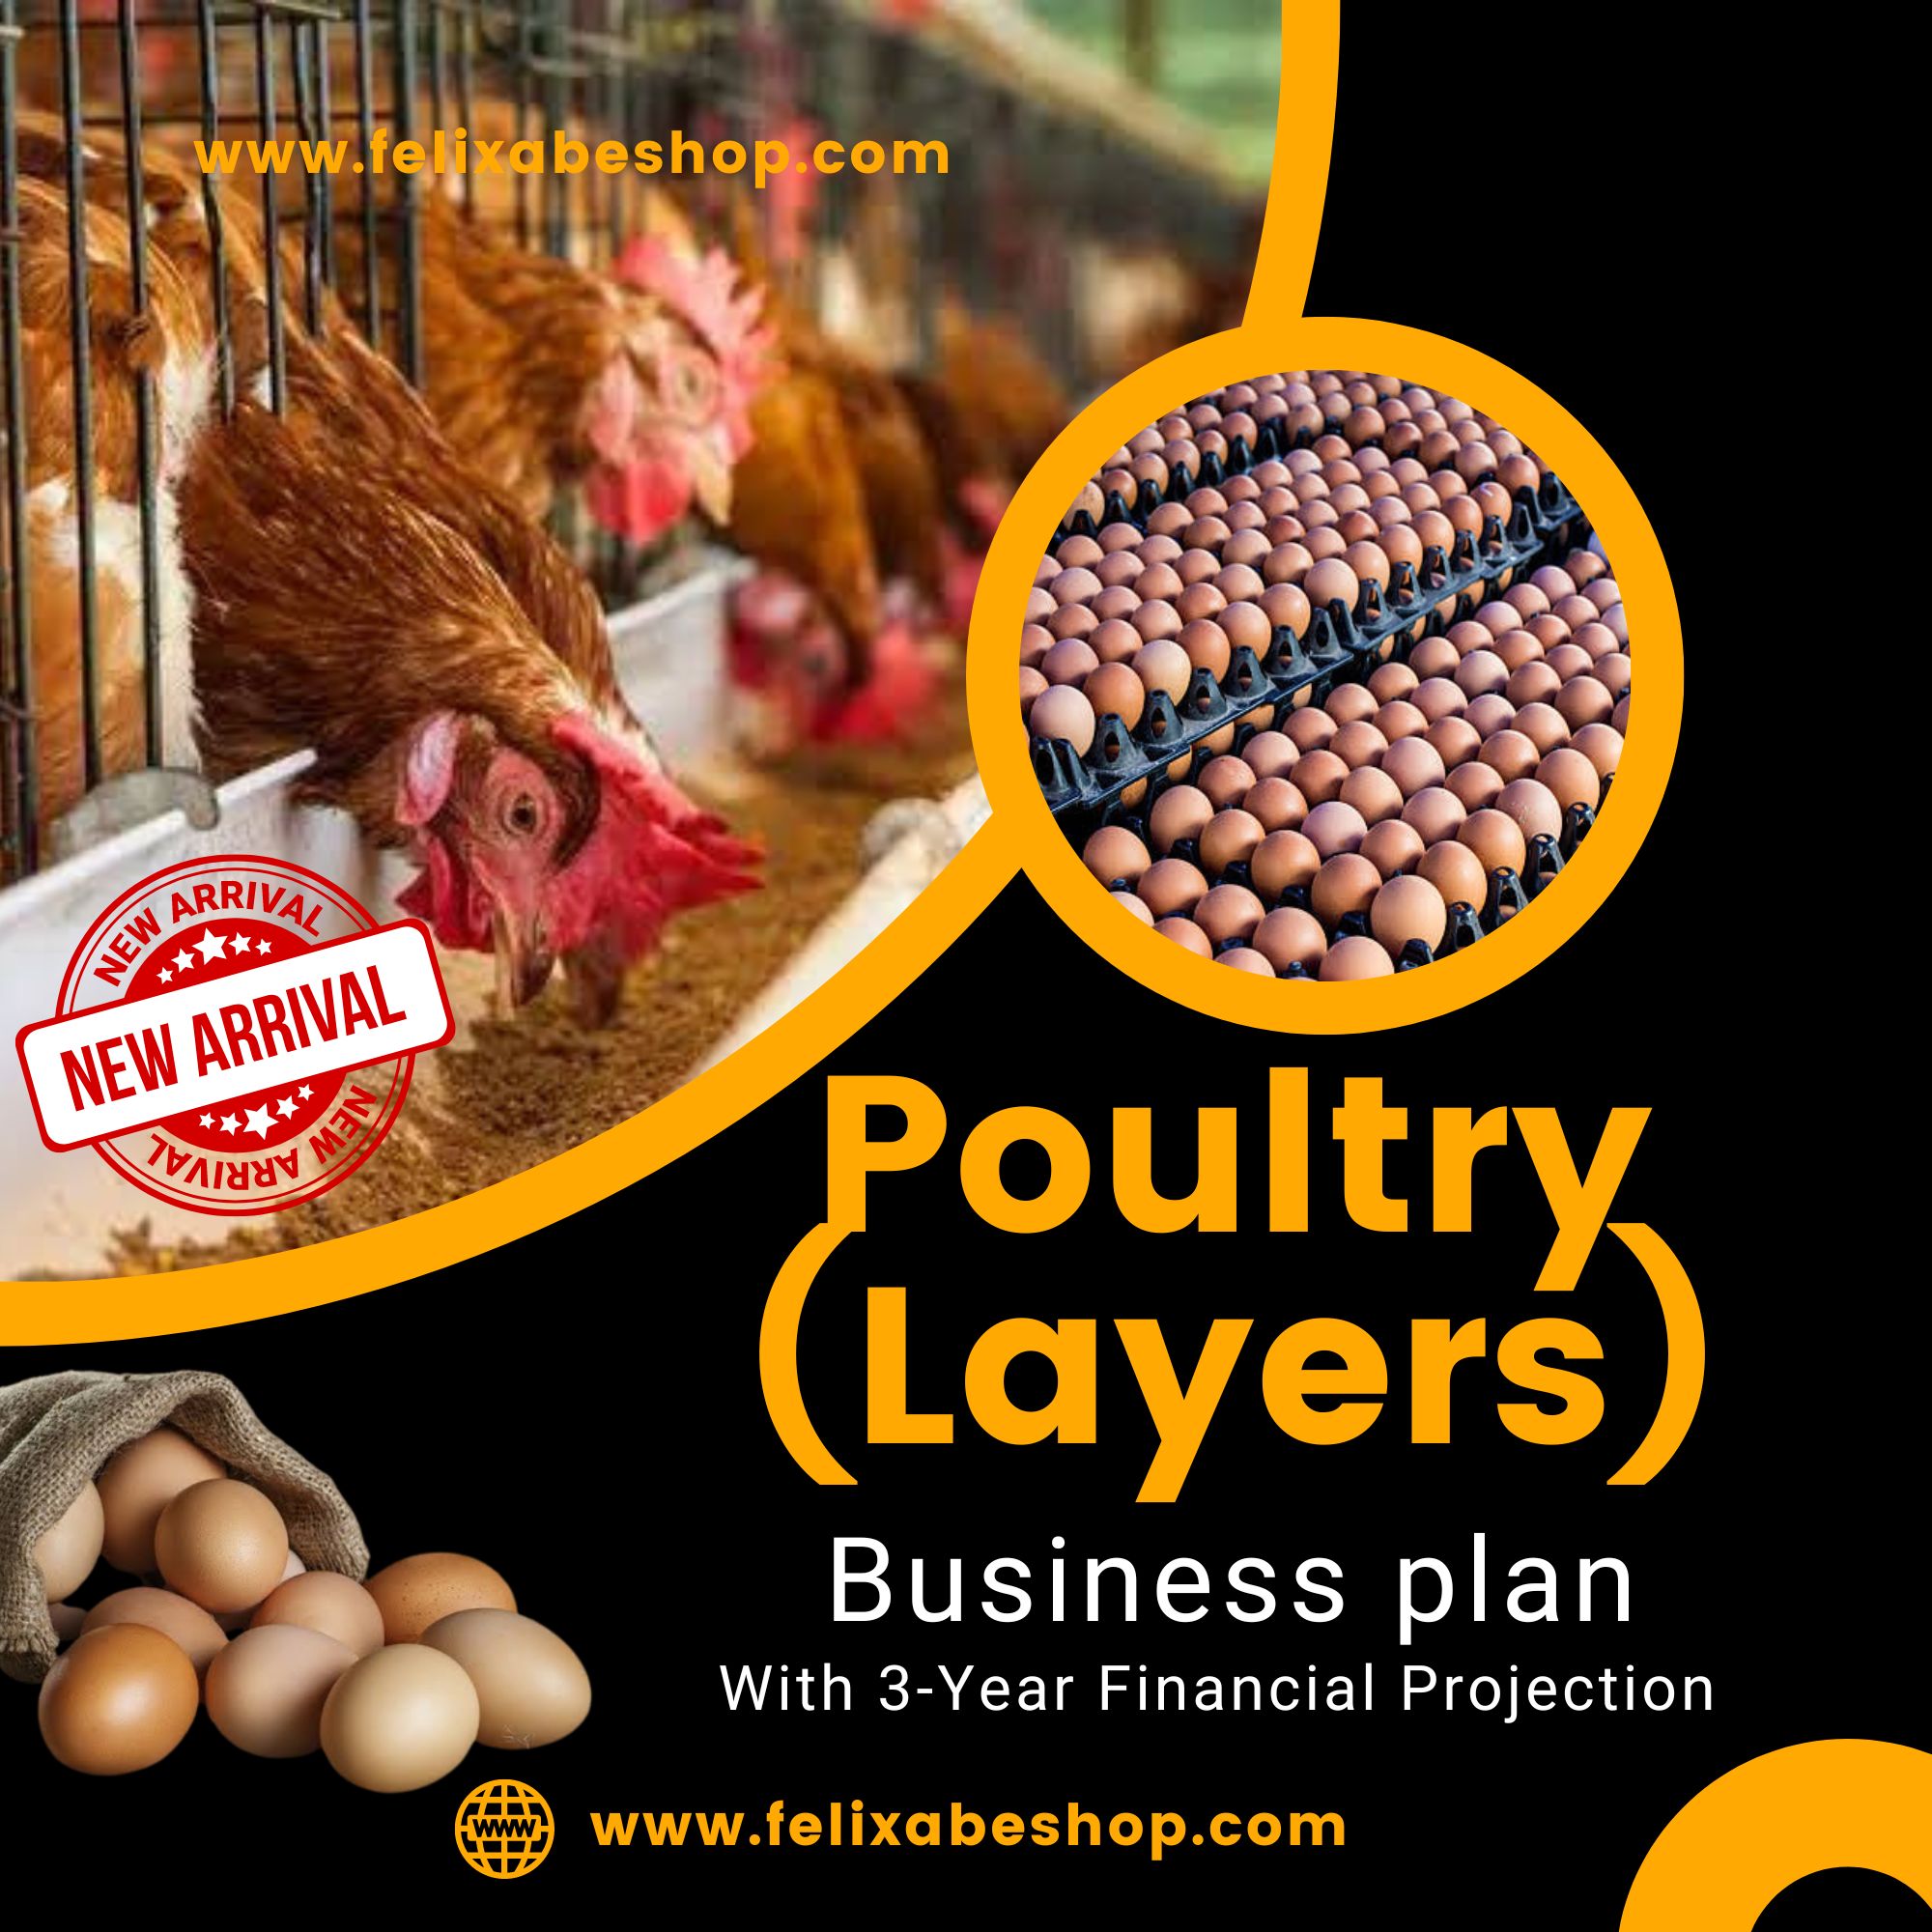 small poultry business plan pdf